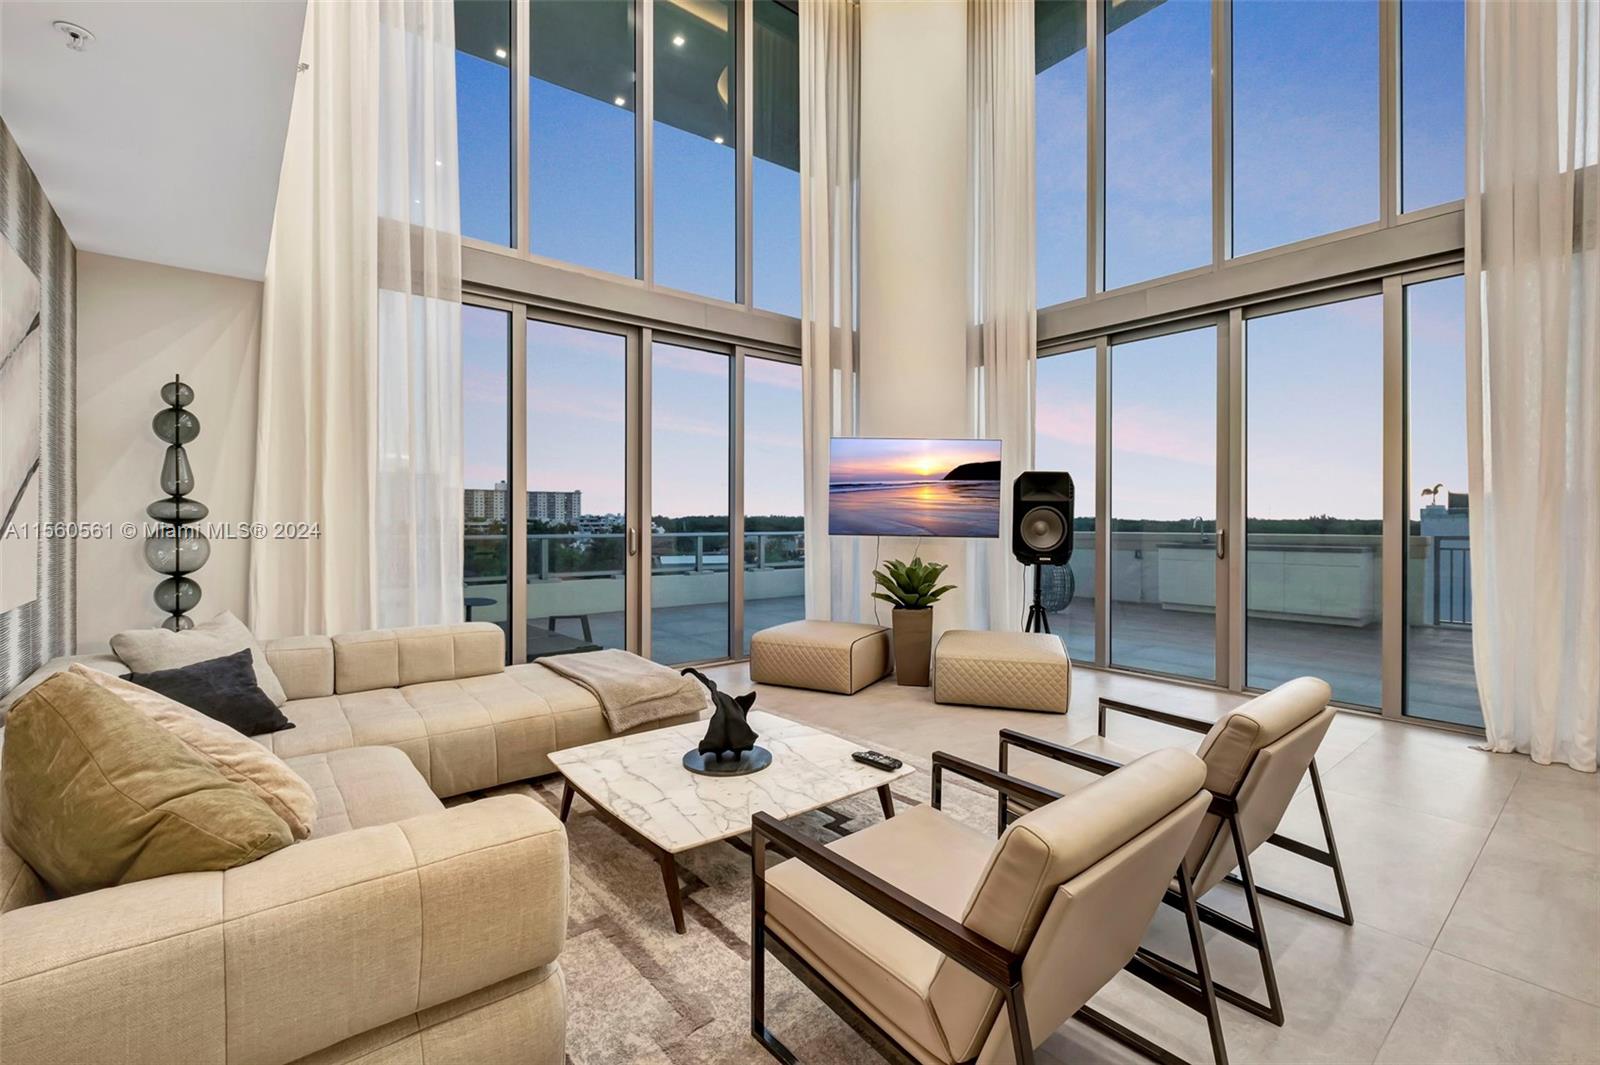 Step into the most unique and spectacular corner unit at Parque Towers. This stunning 4-bed, 4.5-bath plus den residence at 330 Sunny Isles Boulevard, Unit 5502, spans 3248 interior sqft and 1,773 exterior sqft, offering breathtaking views of the Intracoastal and the bay, complete with its own private pool. Italian custom cabinets, quartz countertops, Bosch & Subzero appliances, and spacious storage closets adorn the unit. Parque Towers provides concierge services, 24-hour security, pool service with a bar & bistro, private cinema & game room, spa & fitness center, valet, and more. The unit also includes 4 parking spots - 2 assigned & 2 valet spots. Indulge in this exclusive opportunity for resort-style living in Sunny Isles Beach.